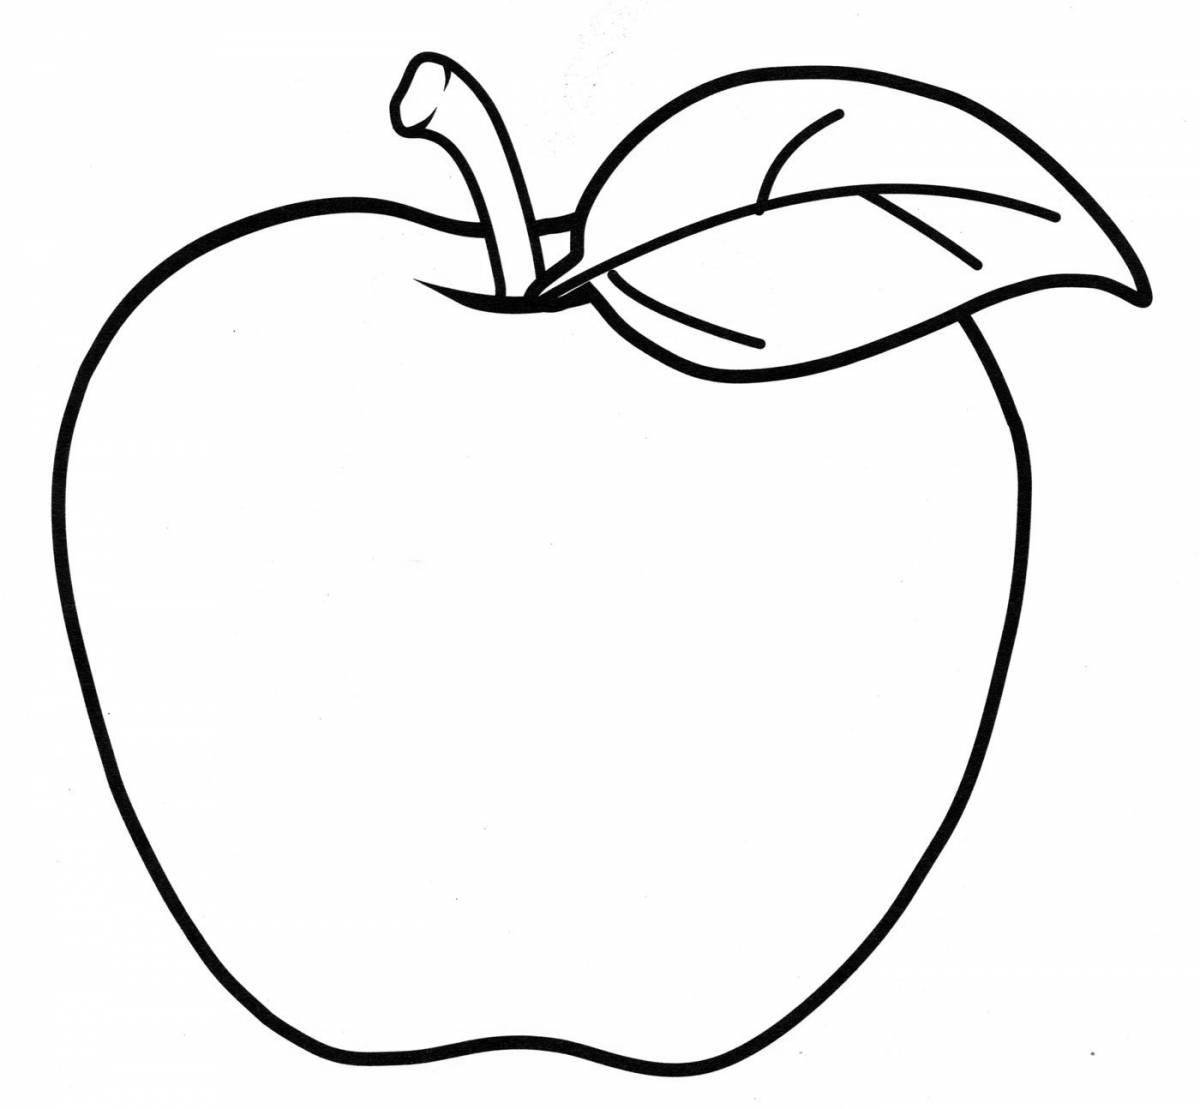 Colored apple coloring book for kids